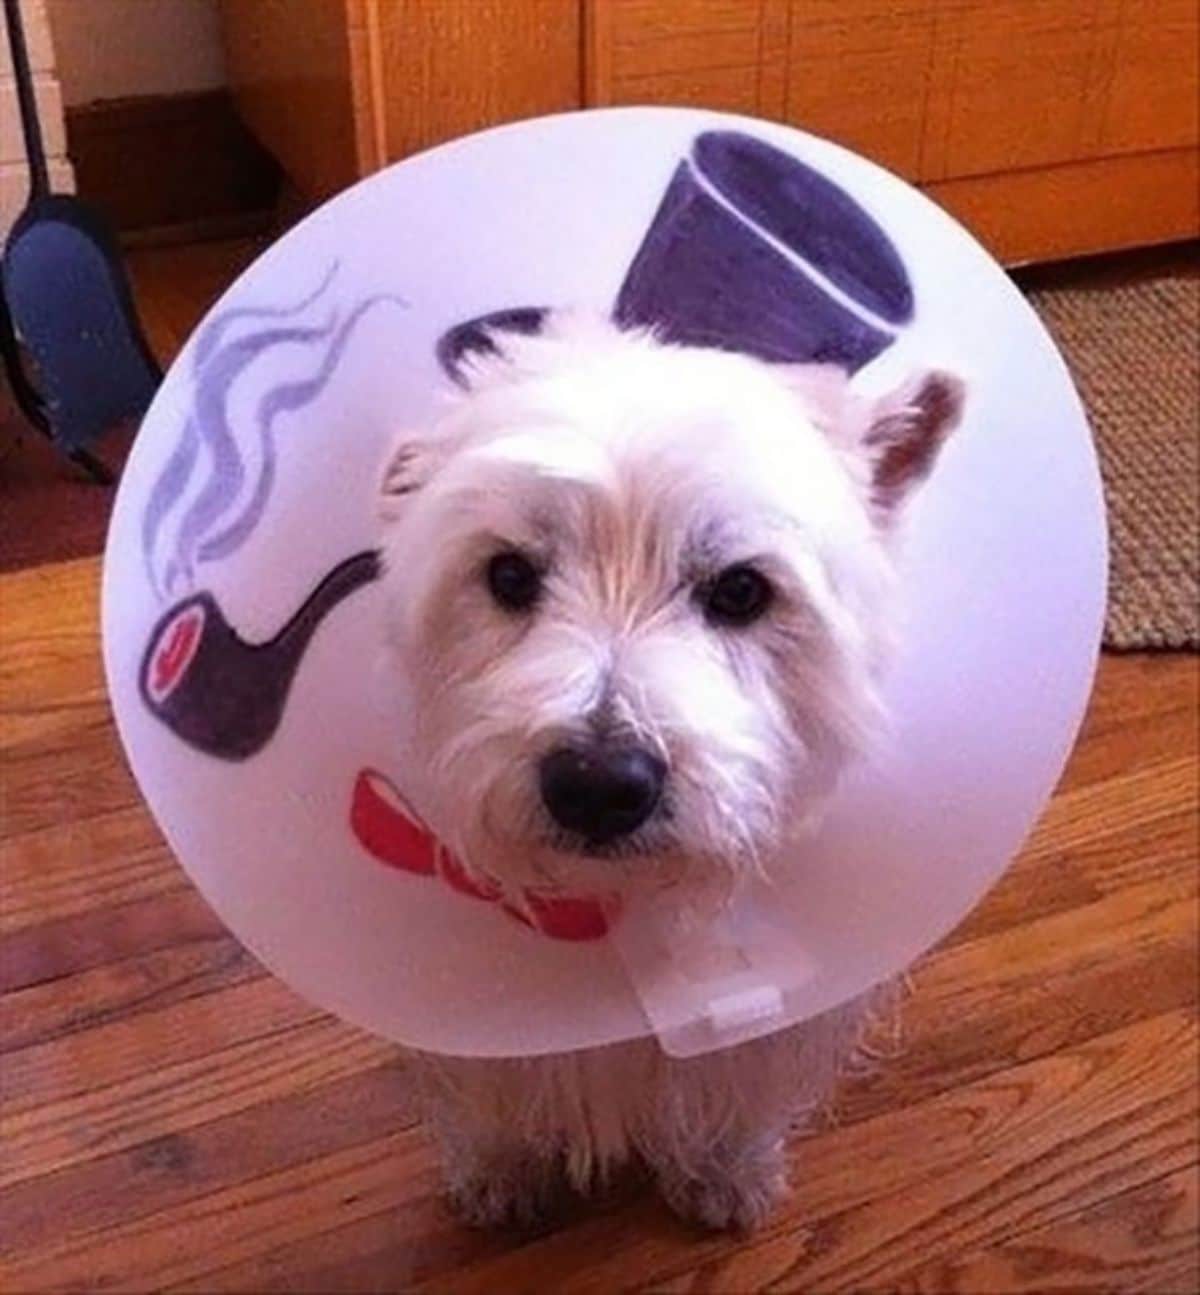 white dog in white cone of shame with a top hat, a tobacco pipe and a red bow tie painted on the inside